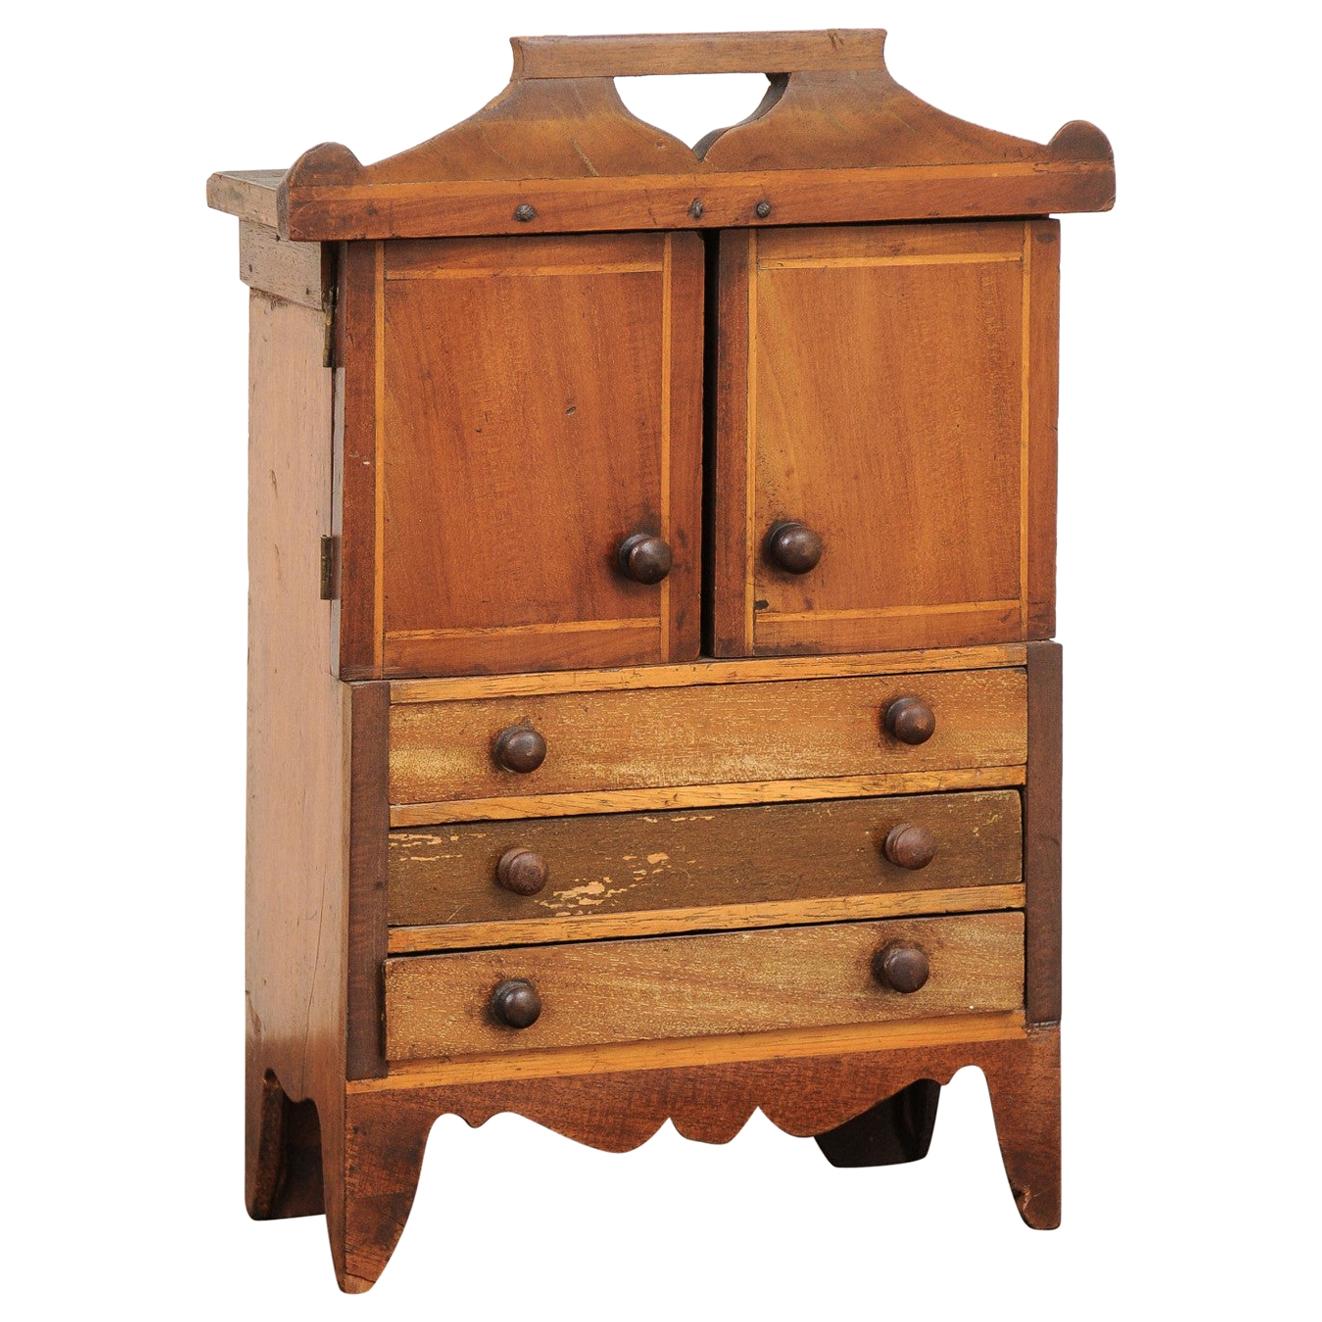 English 1890s Fruitwood Miniature Cabinet with Petite Doors and Three Drawers